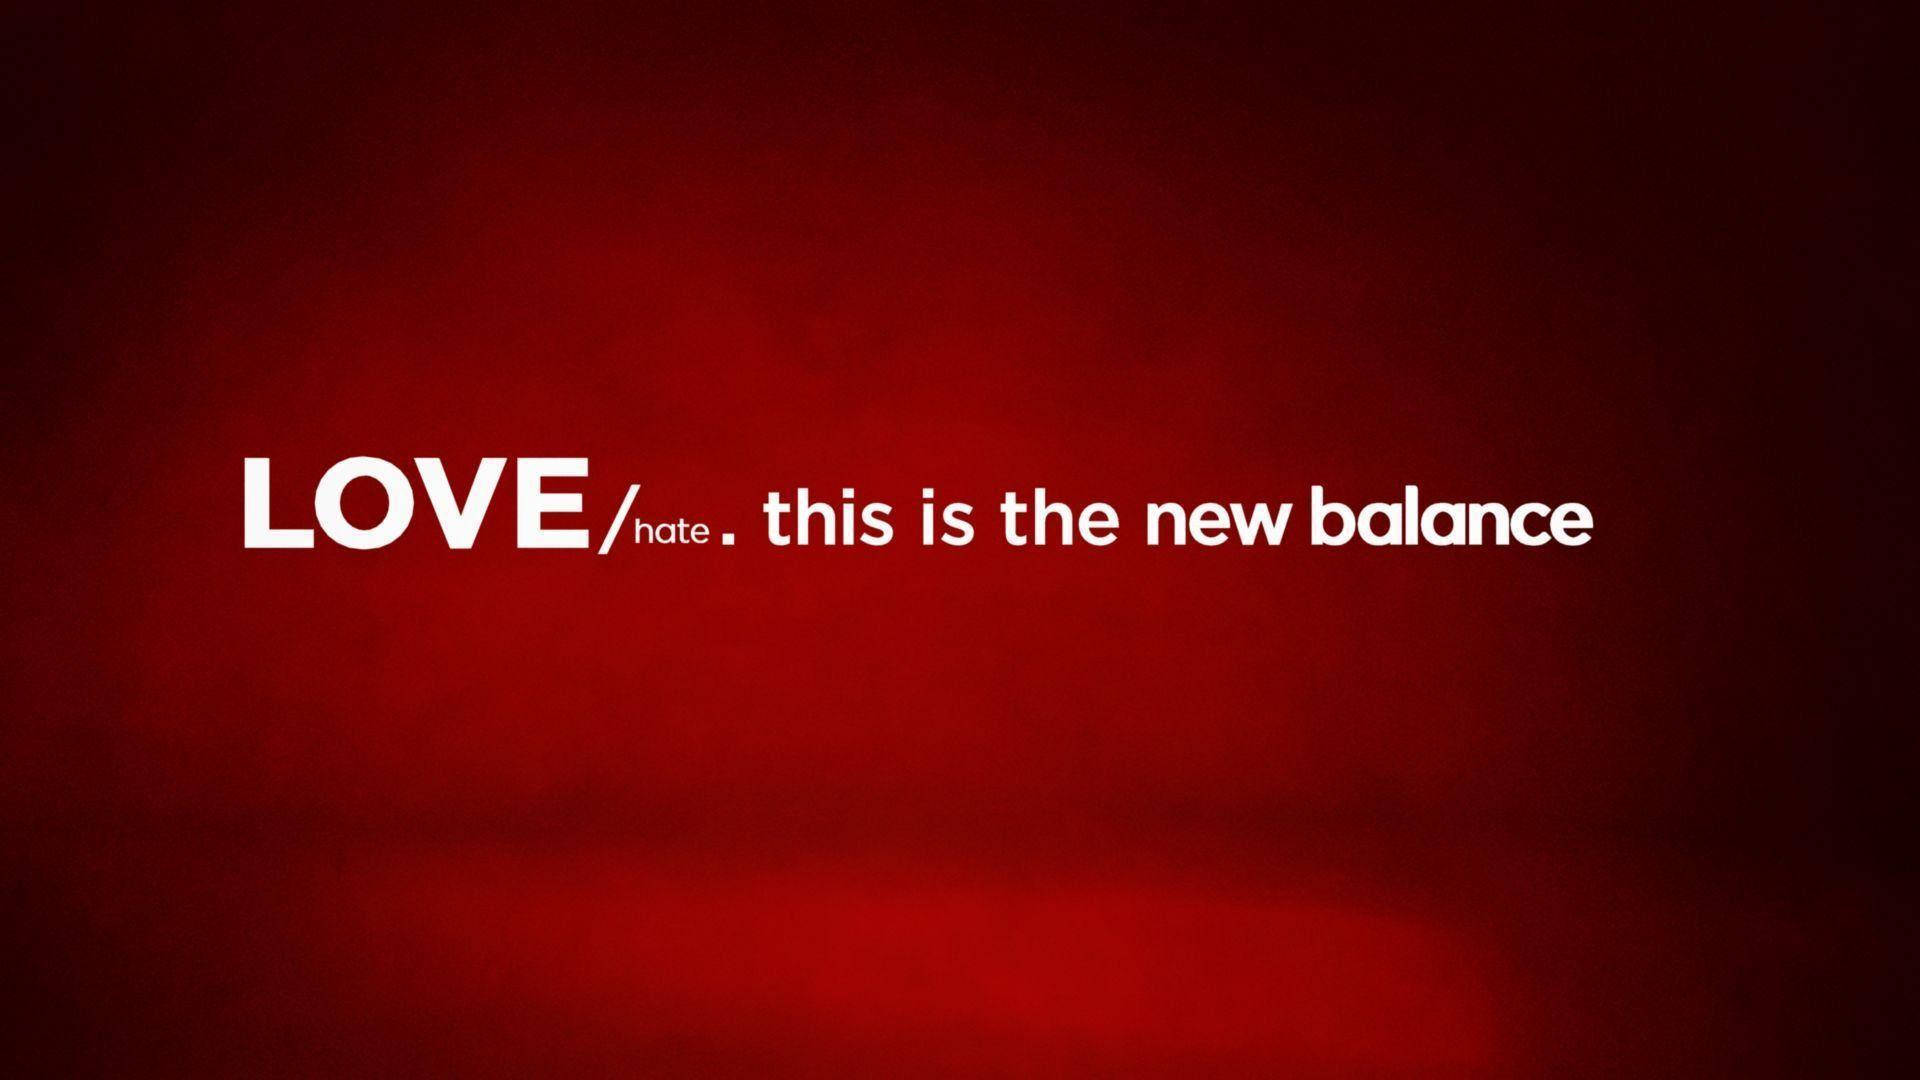 New Balance Love Hate Poster Background